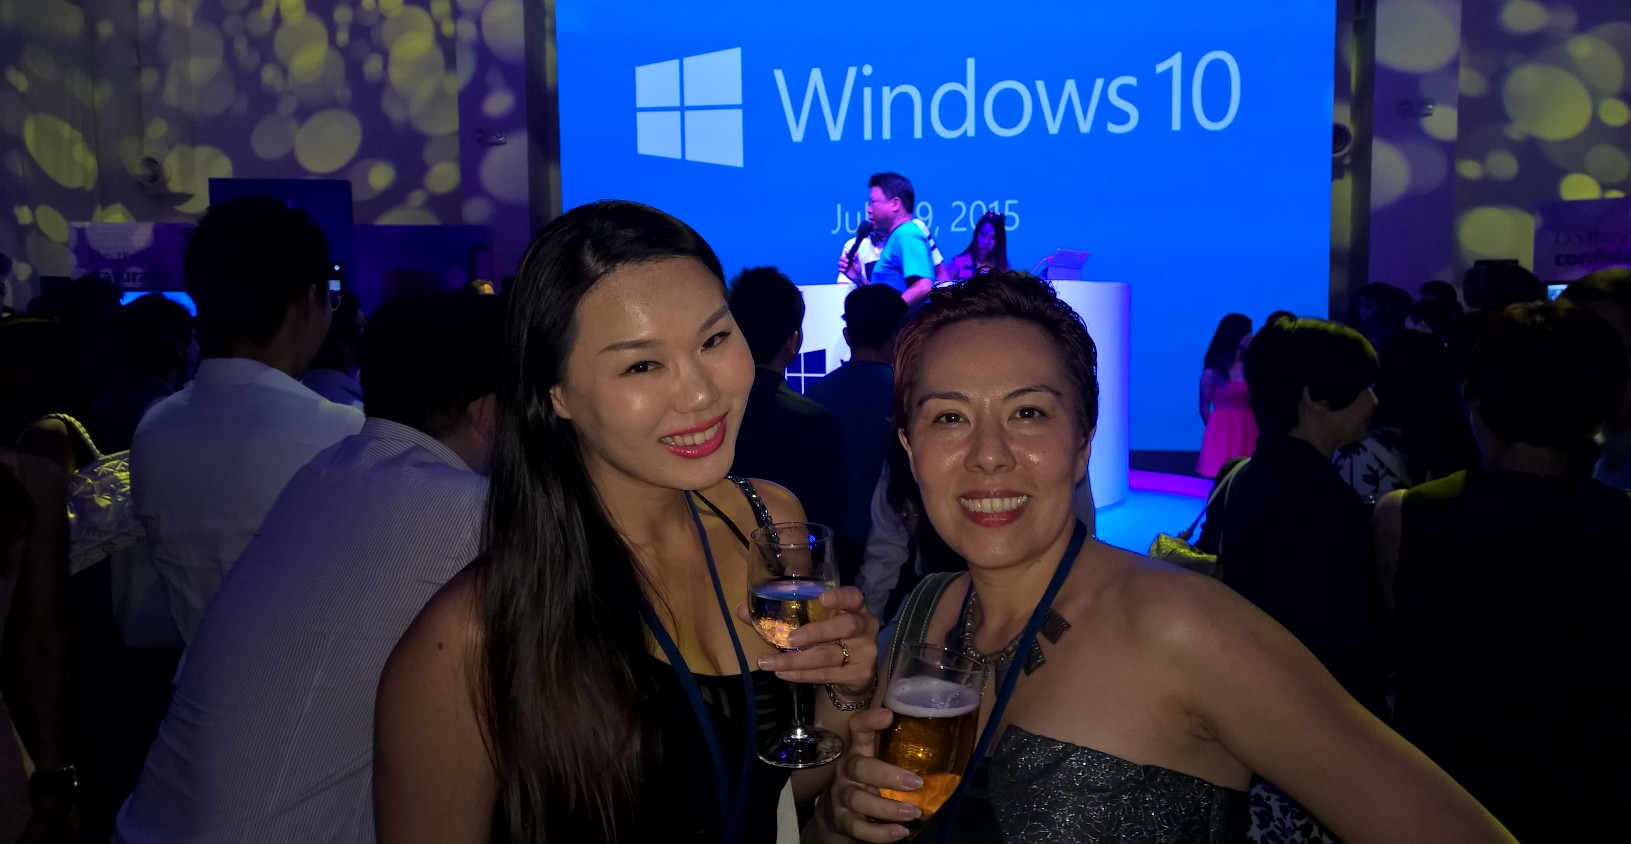 Windows 10 Free Upgrade Available in 190 Countries Today